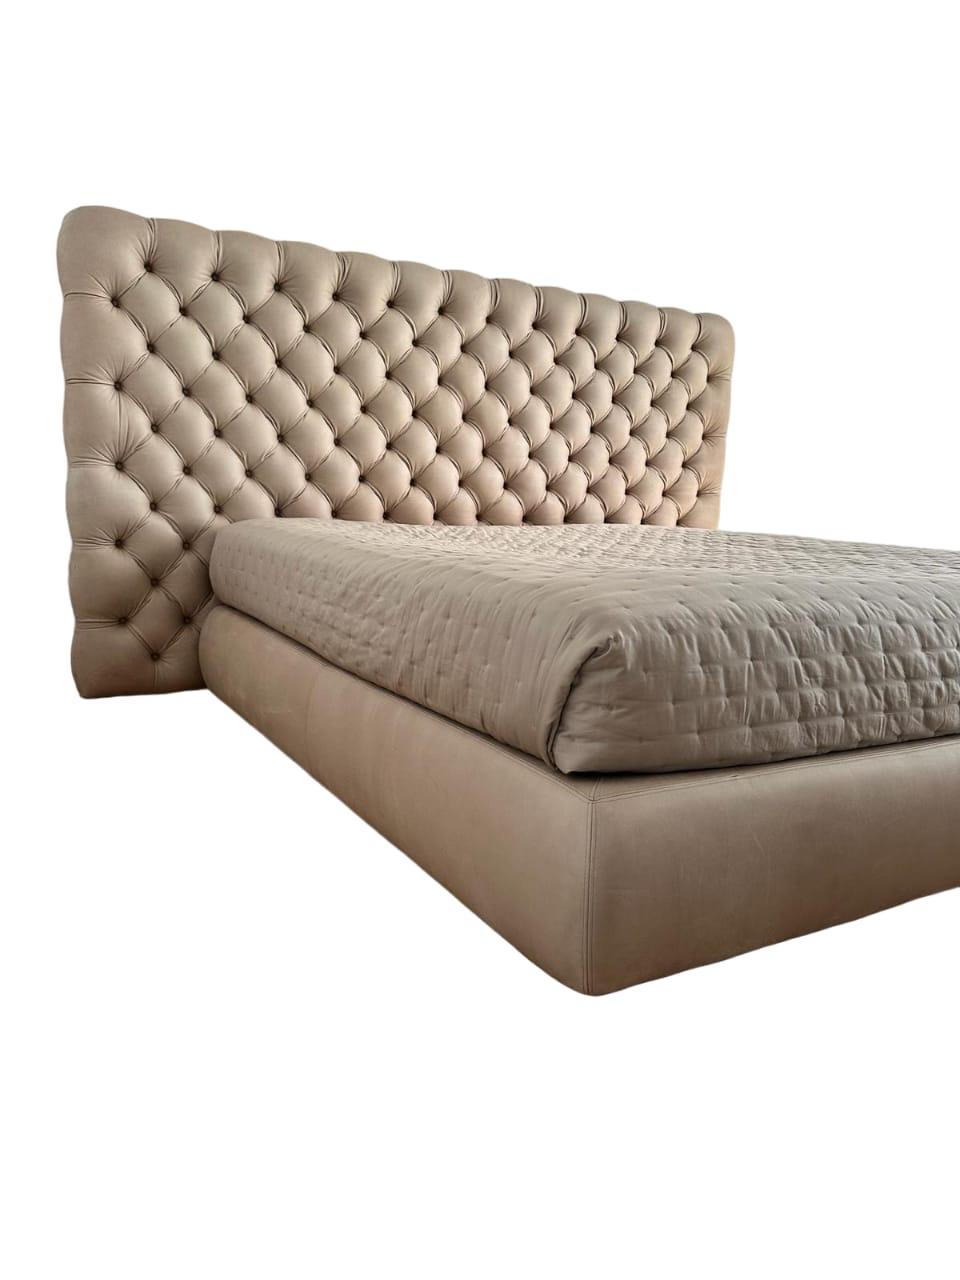 Italian Baxter Heaven Leather Bed by Paola Navone For Sale